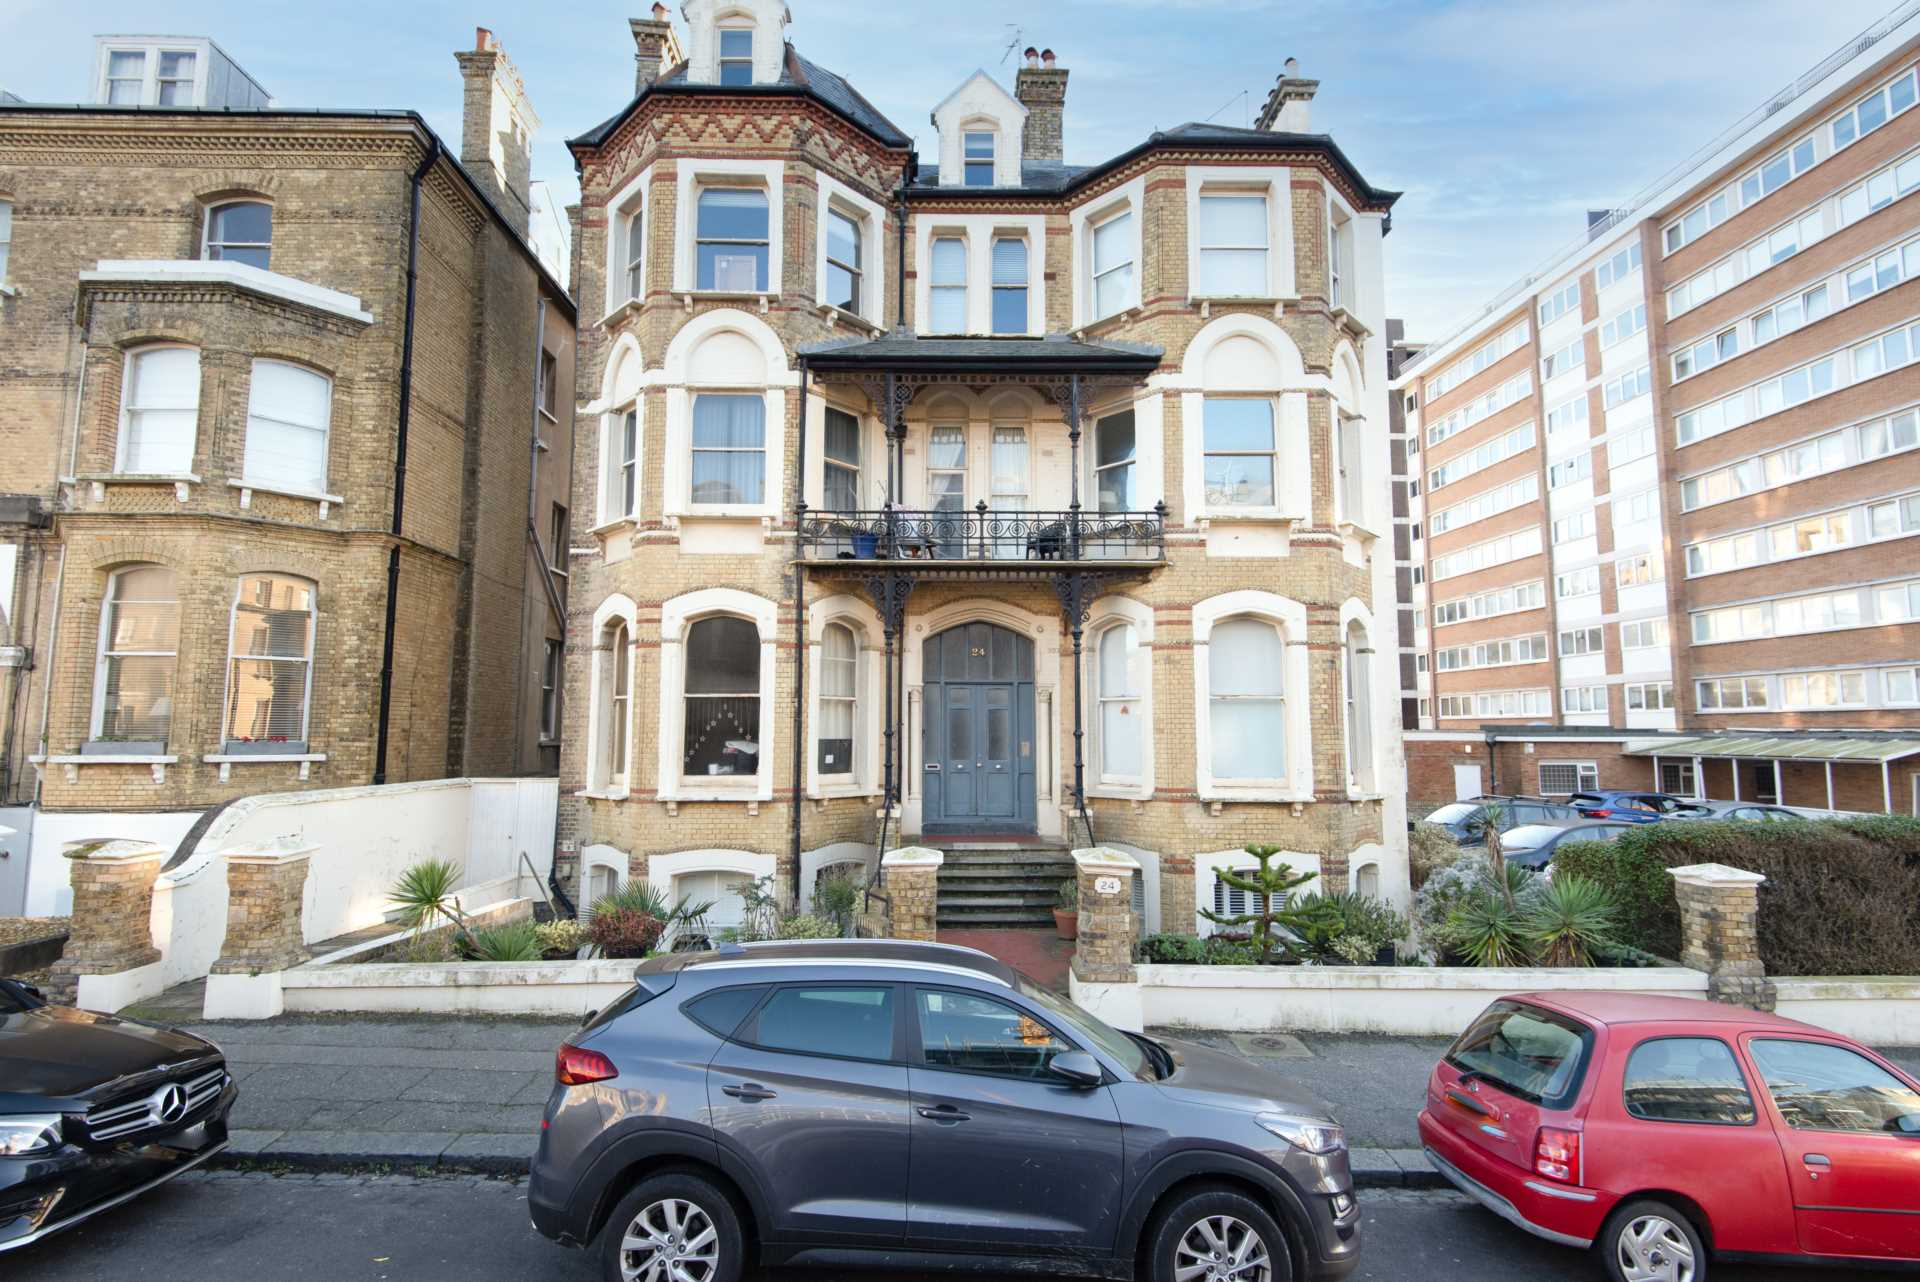 Second Avenue Three Bedroom Apartment Hove with TWO CAR PARKING SPACES. HOLIDAY LET/SHORT LETS DOG FRIENDLY, Image 12